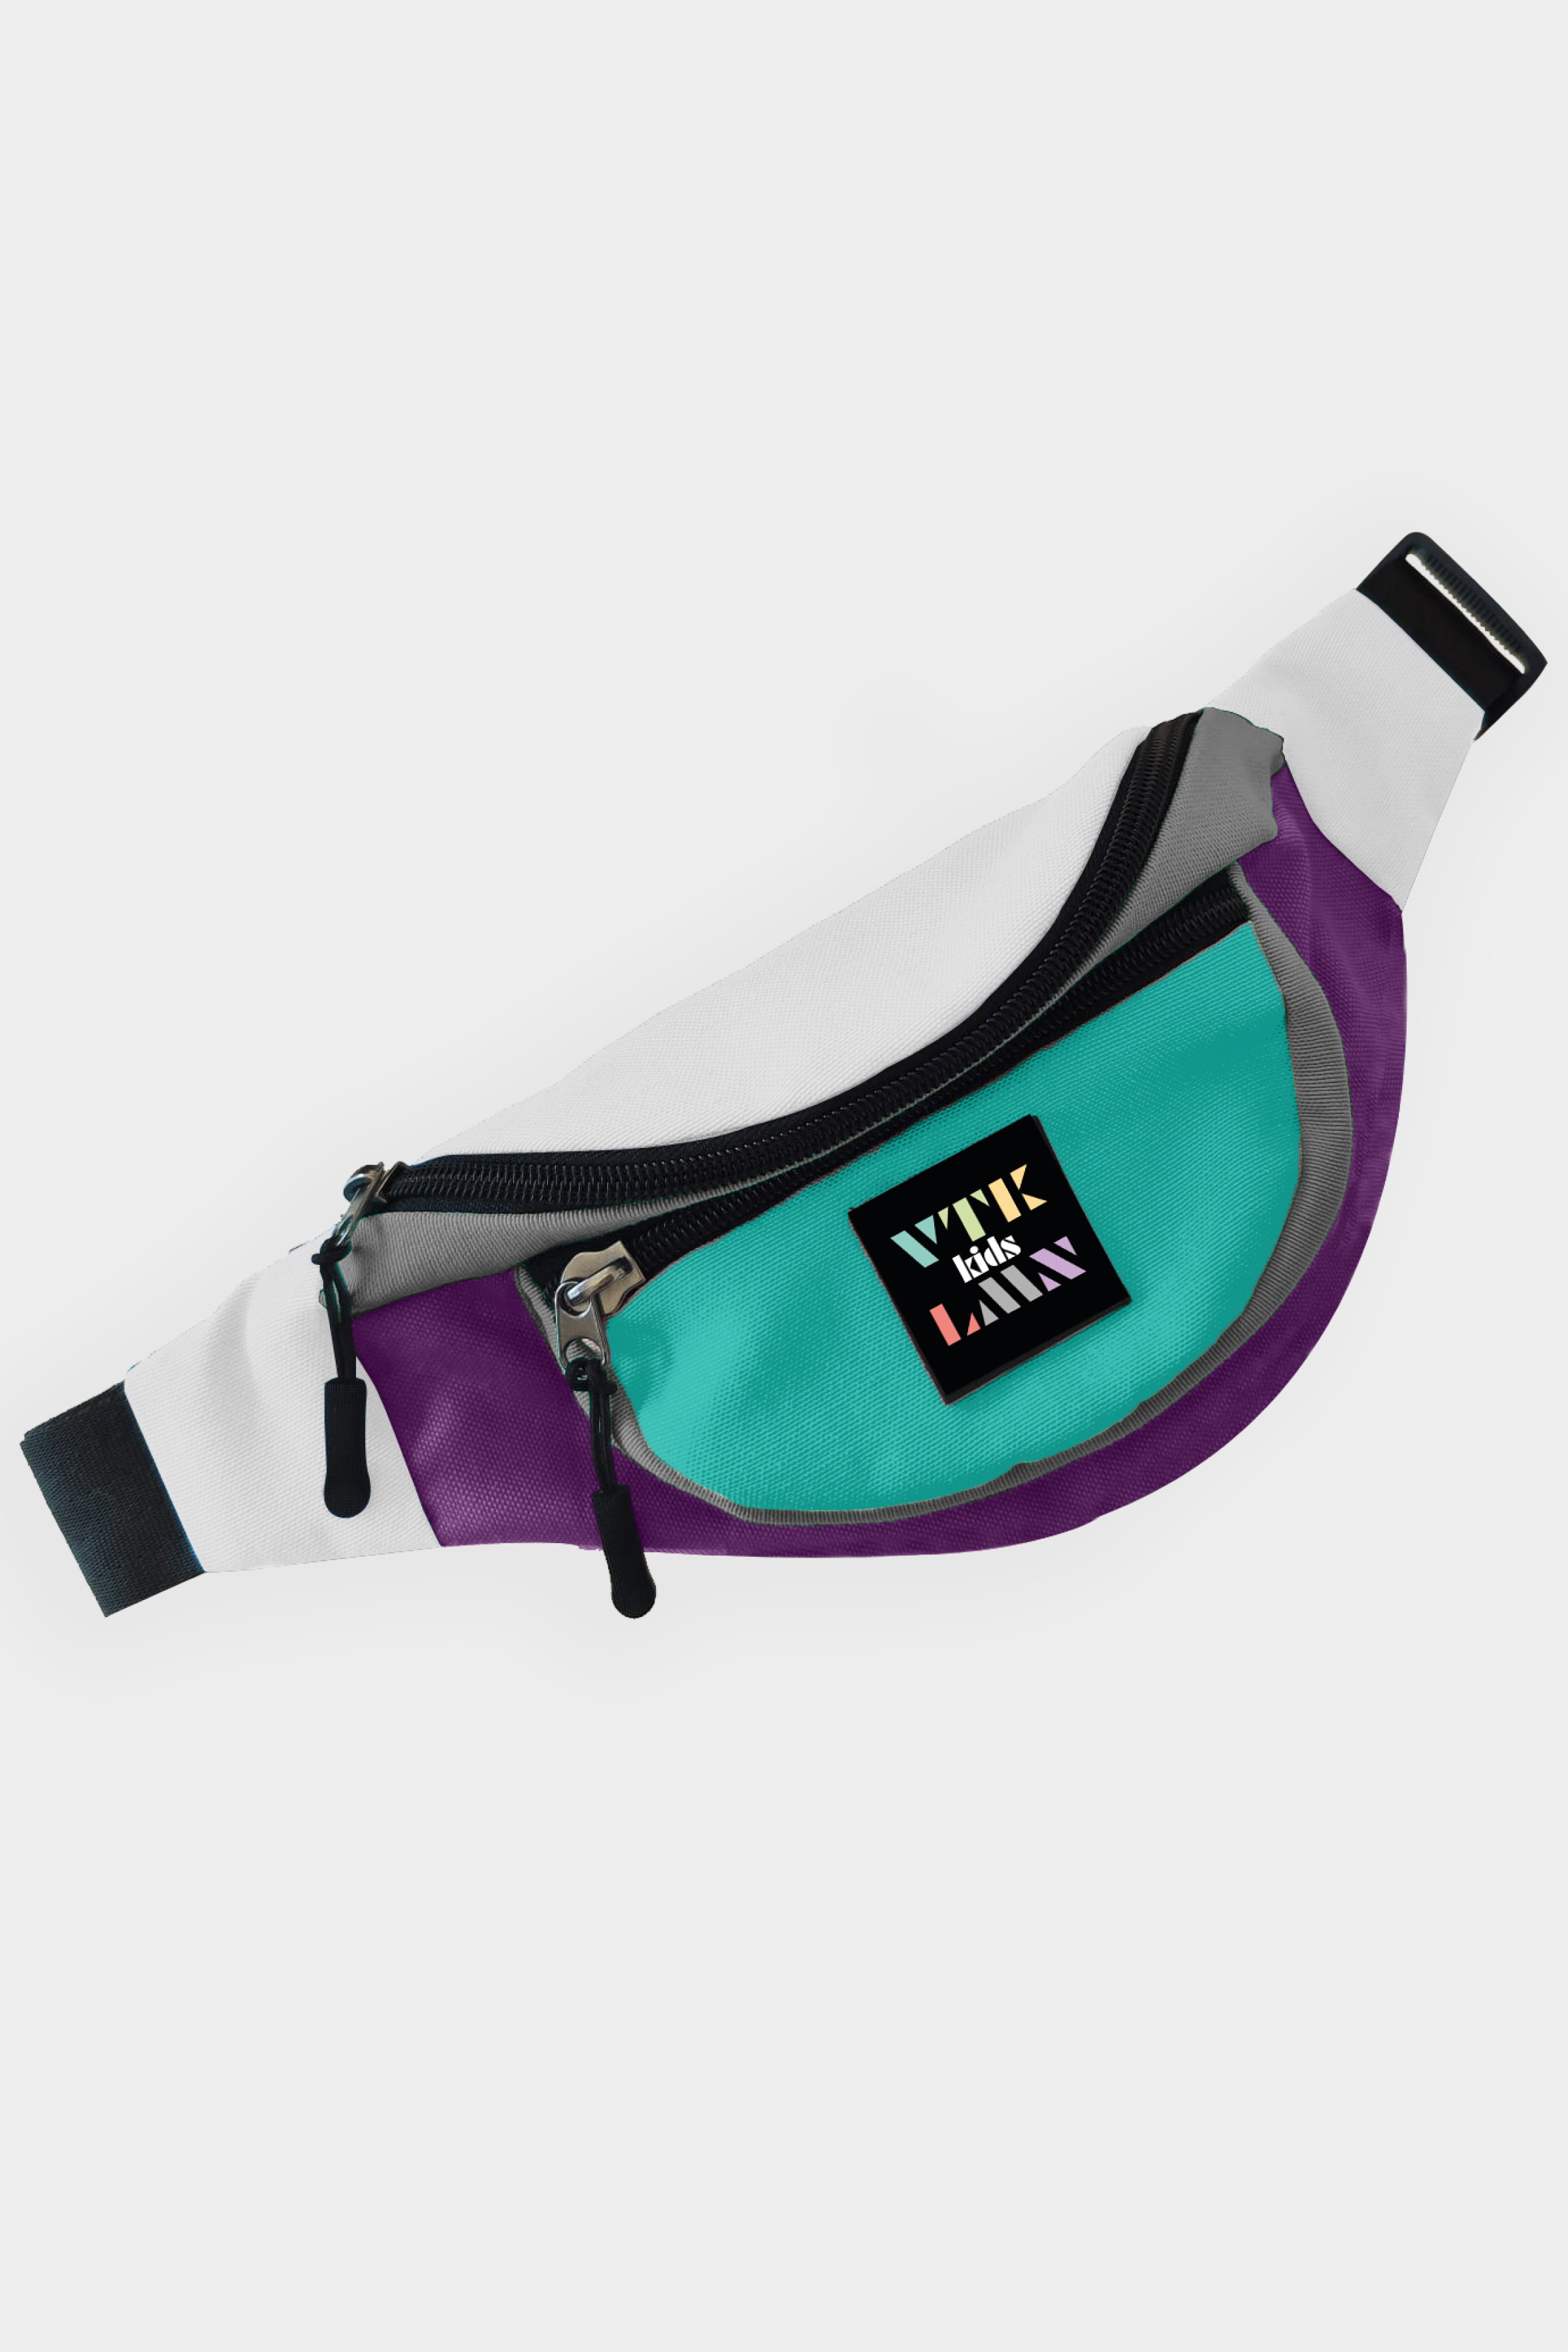 Colorful Shoulder and Waist Kid Bag - Mint Gray Purple White